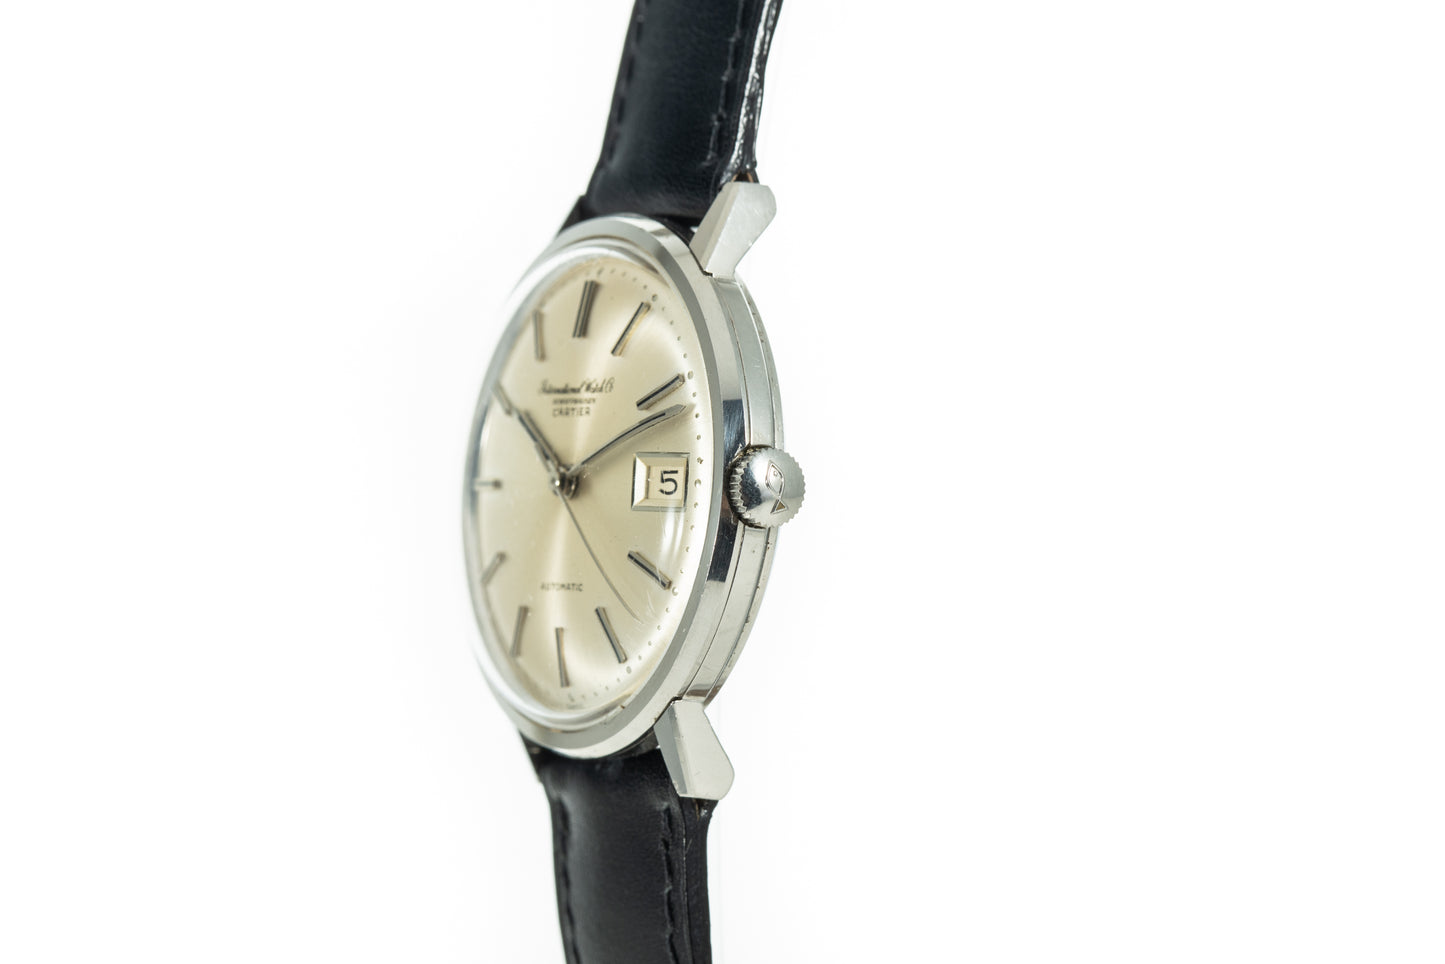 IWC Gent's Dress Watch Retailed by Cartier